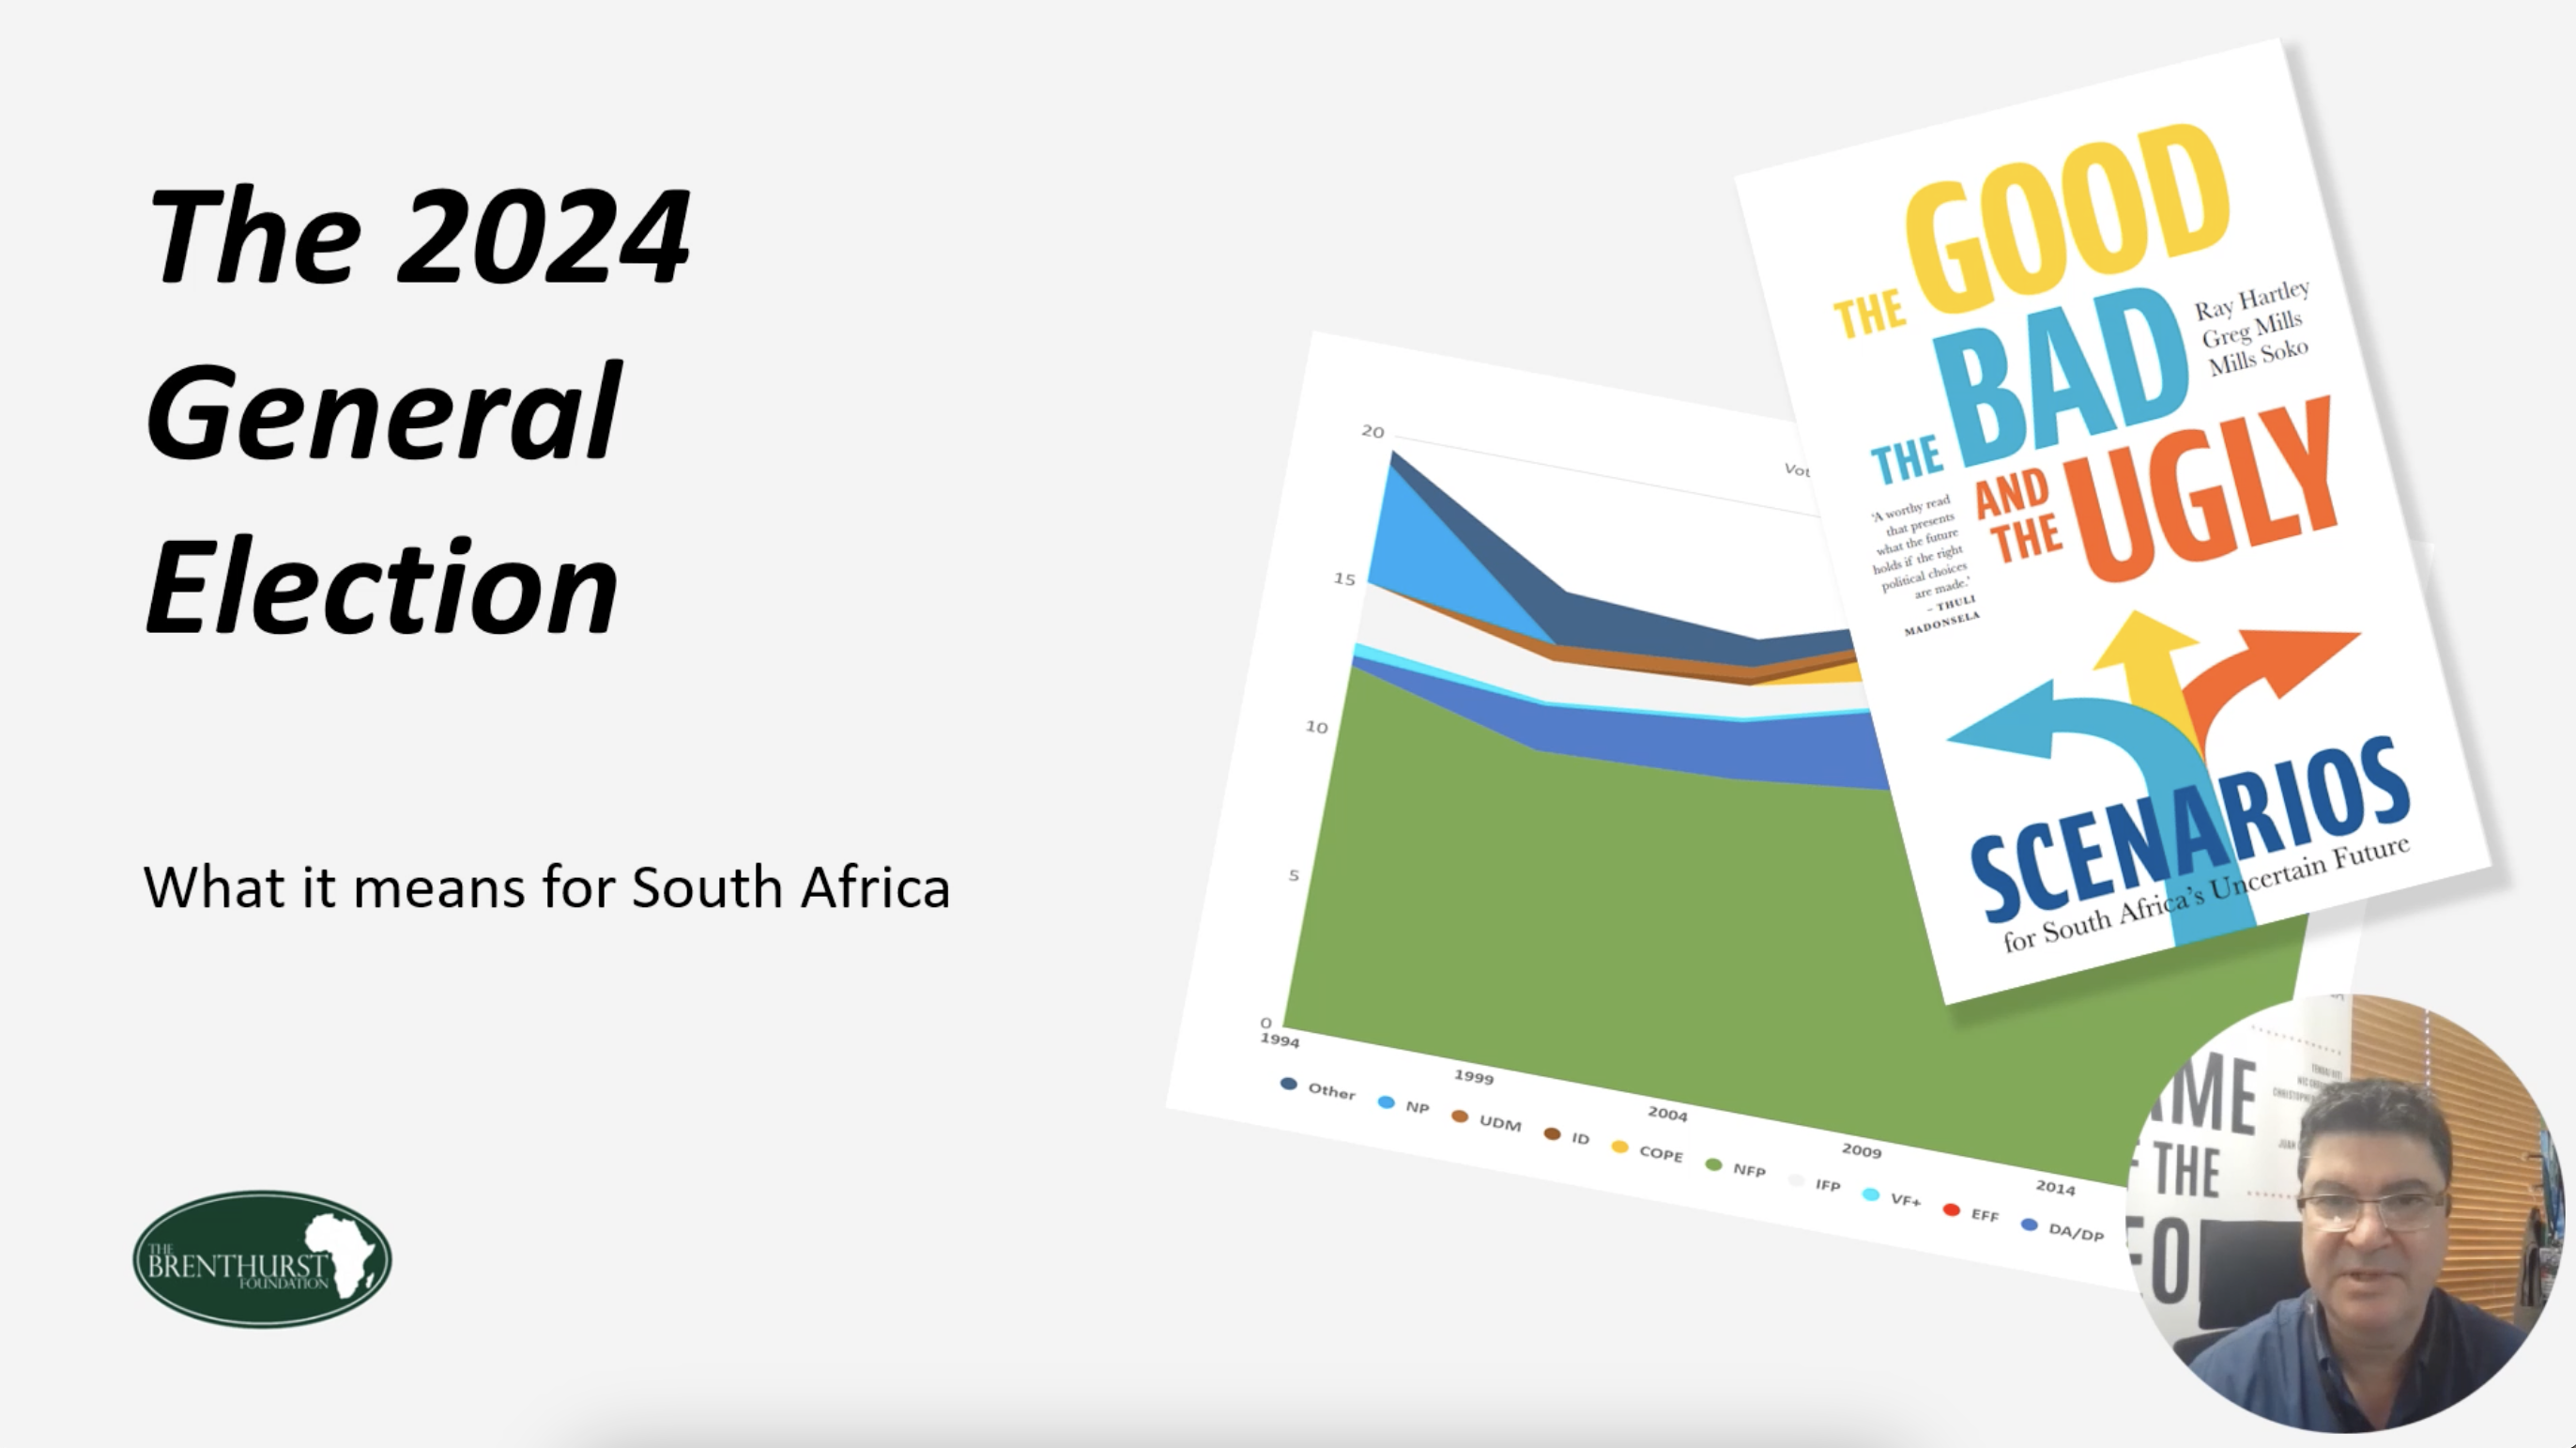 South Africa's 2024 Election: The Good, The Bad, and The Ugly?